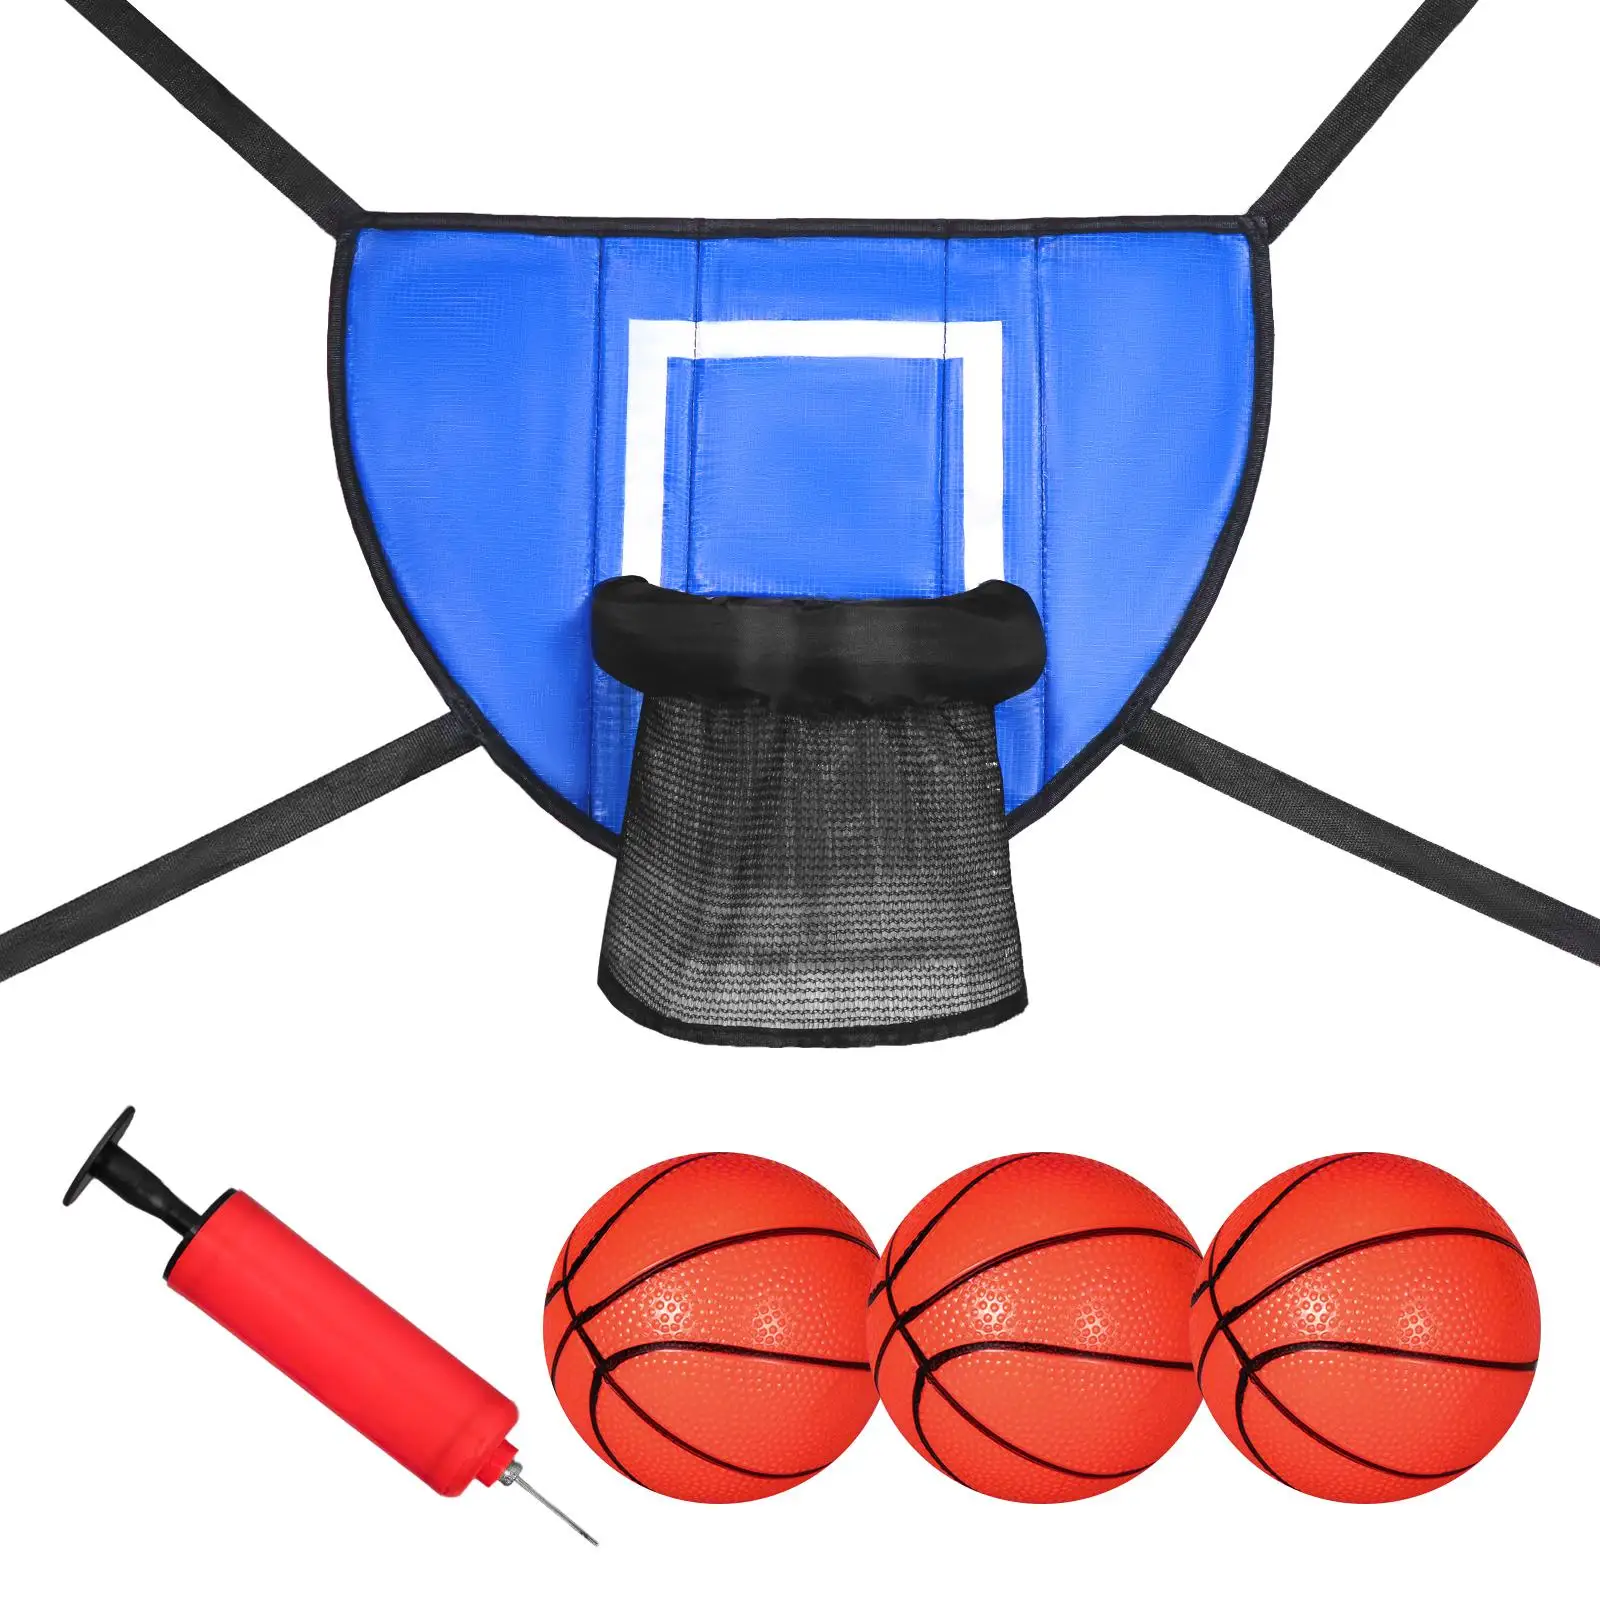 Mini Basketball Hoop for Trampoline with Enclosure with Connection Ropes Trampoline Accessories for Boys Girls Kids Children